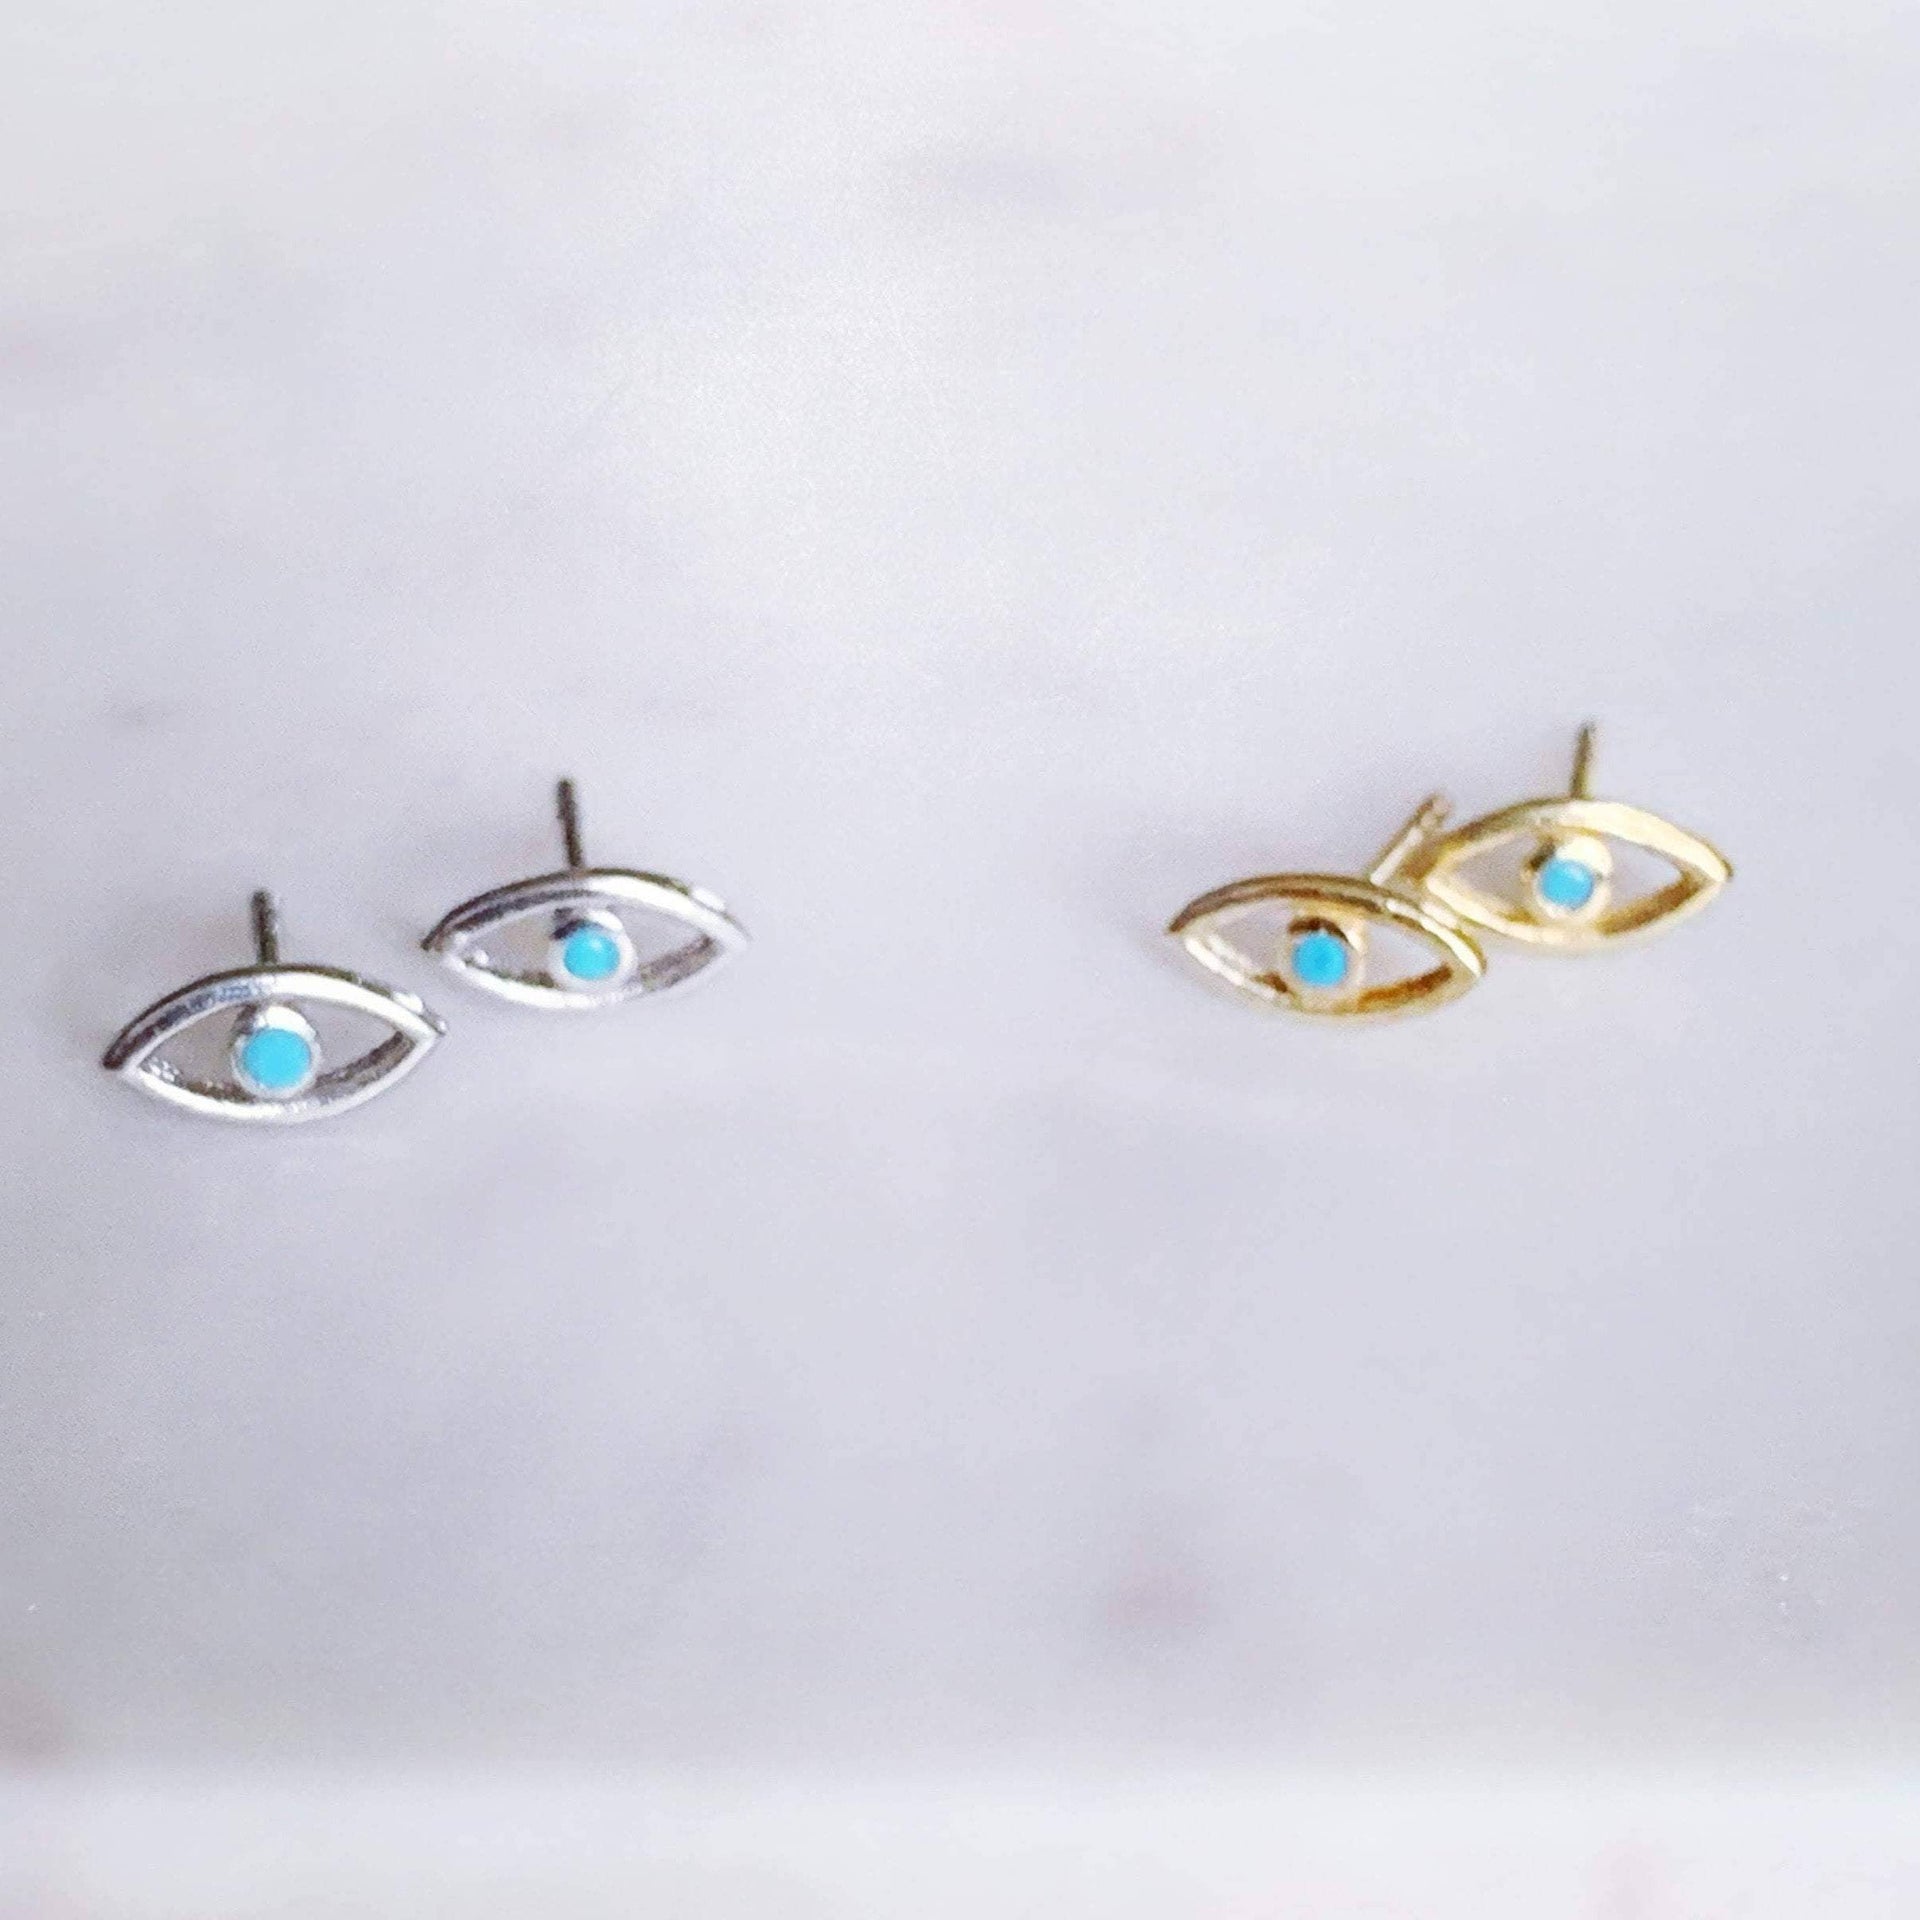 Stitch and Stone Earrings Evil Eye Stud Earrings with Sterling Stone - Gold or Silver